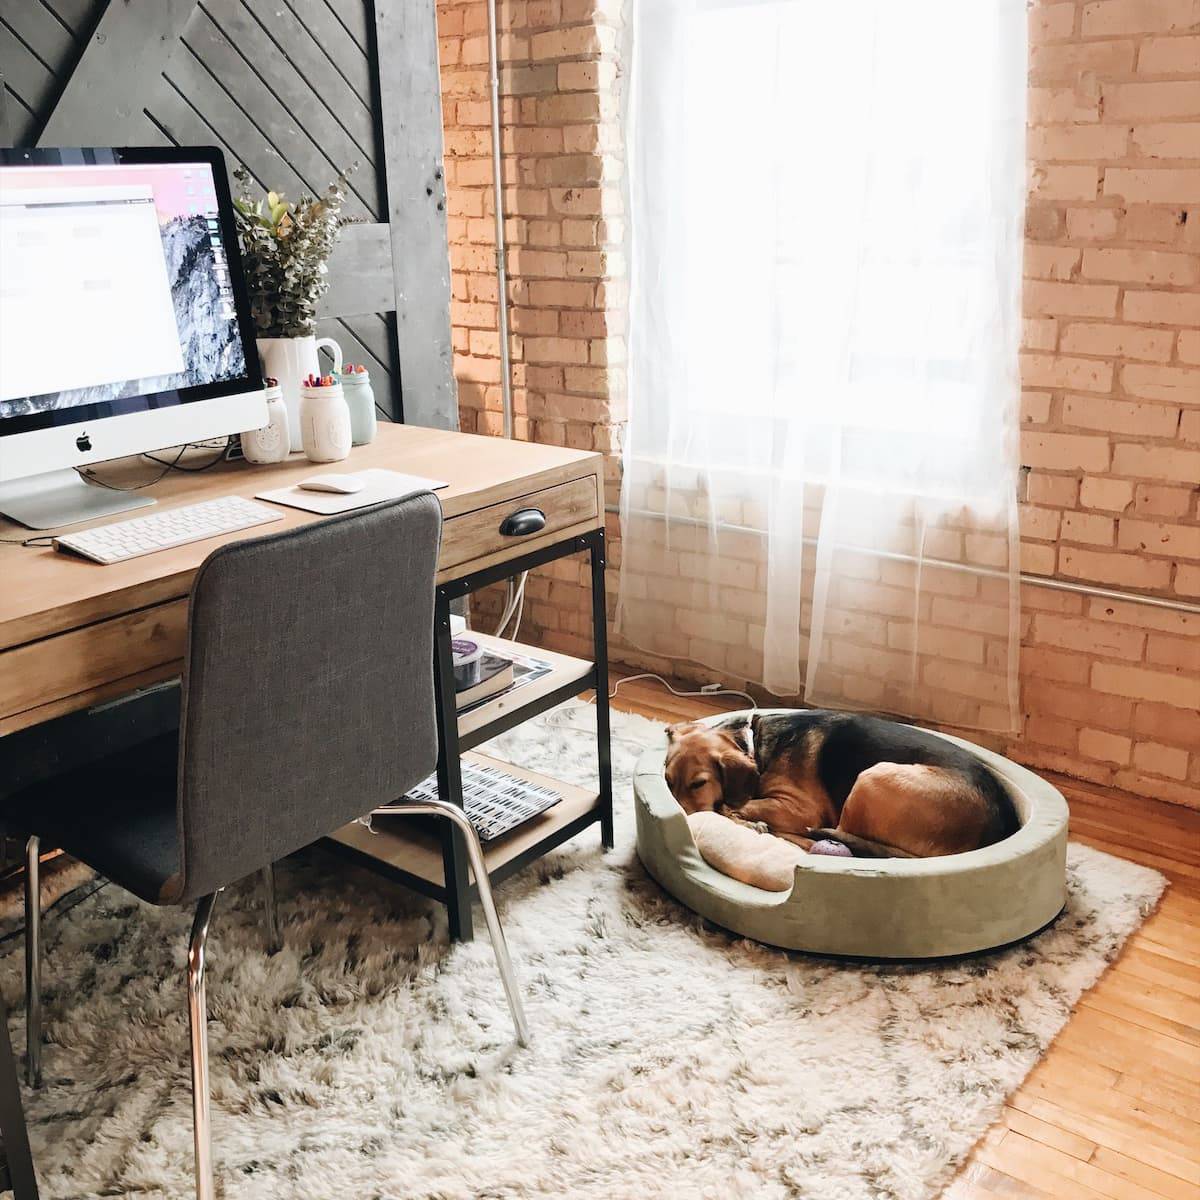 Sage sleeps in a dog bed in a home office.